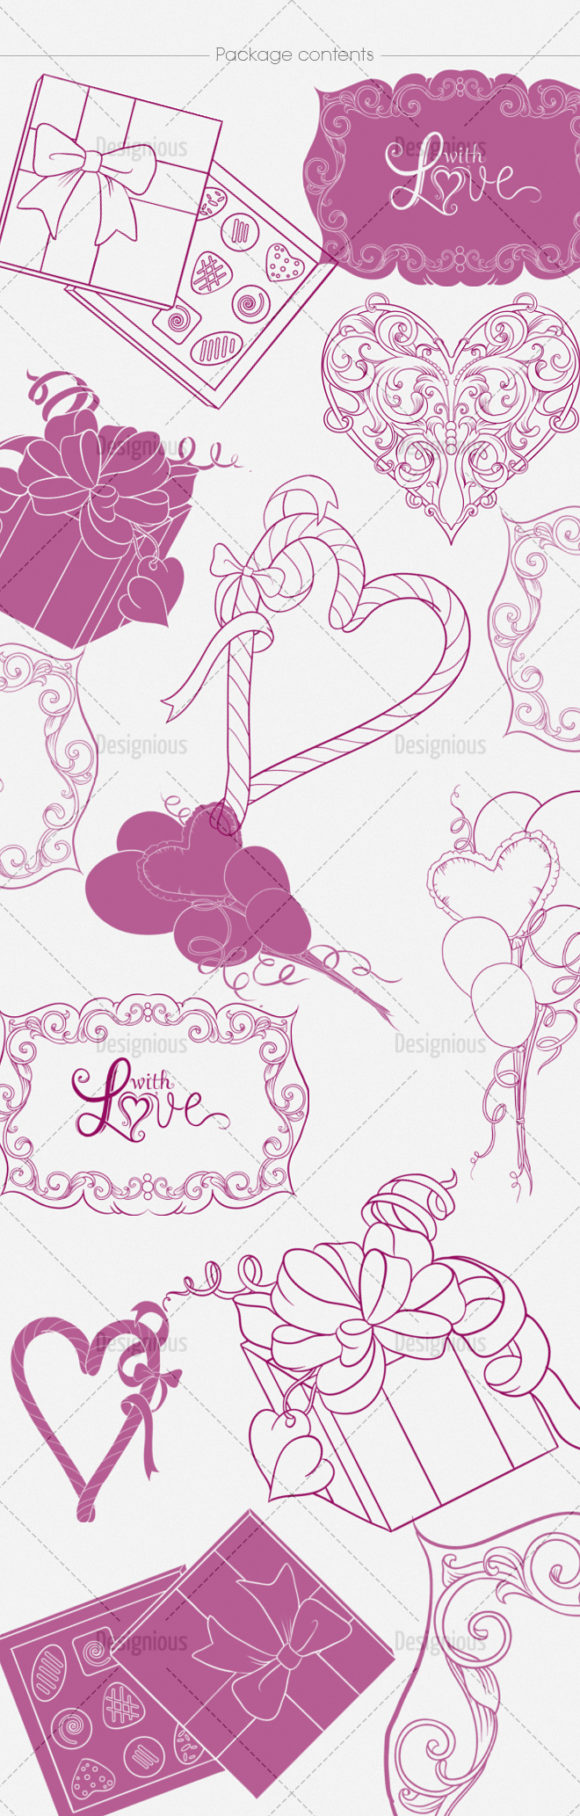 Valentines Day Brushes Pack 1 2